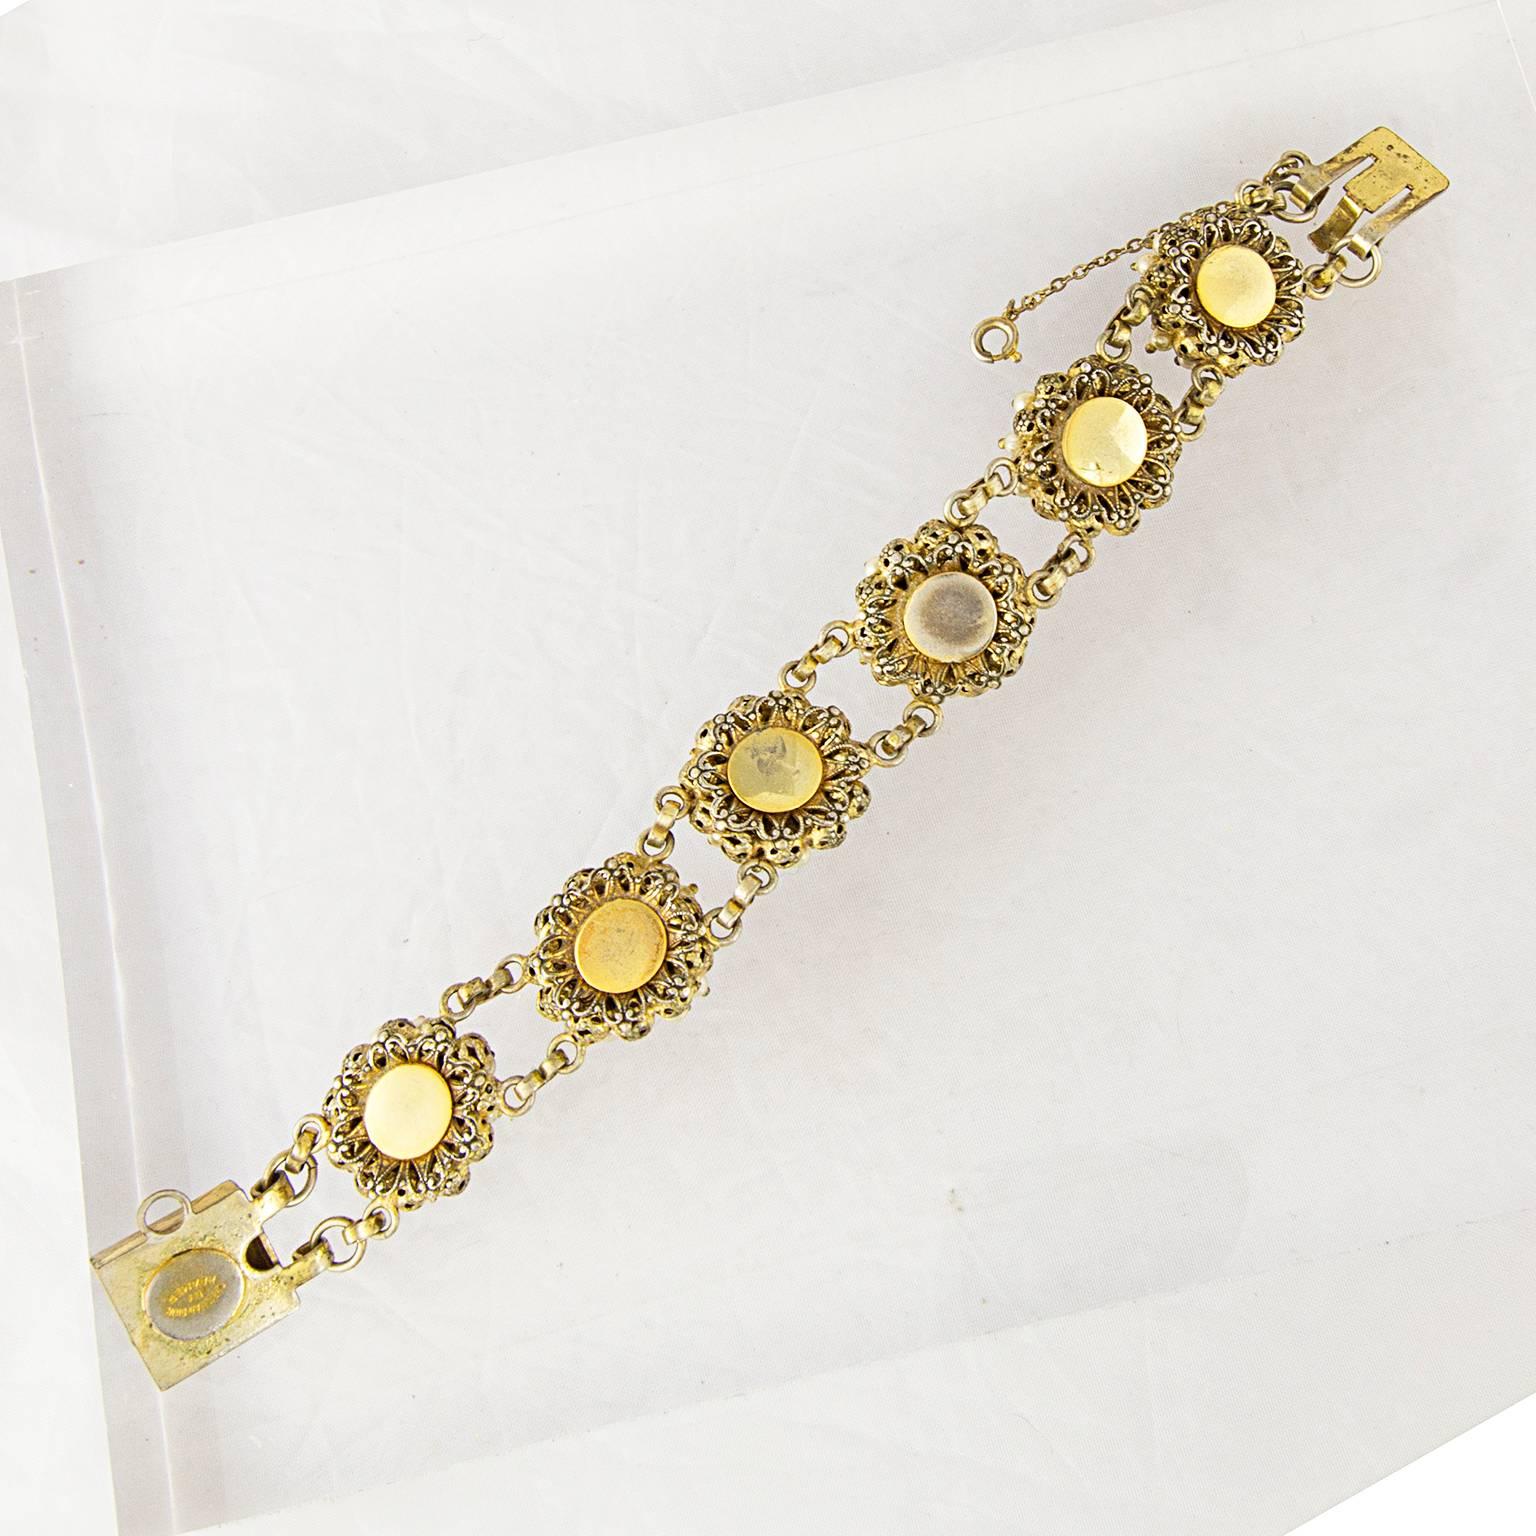 A couture vintage bracelet by Christian Dior manufactured by Kramer.
In the 1950s and 60s, Kramer produced fantastic and now very collectable costume jewellery for Christian Dior.
Fully signed. 
In a great pre-loved condition. 
Don't hesitate to